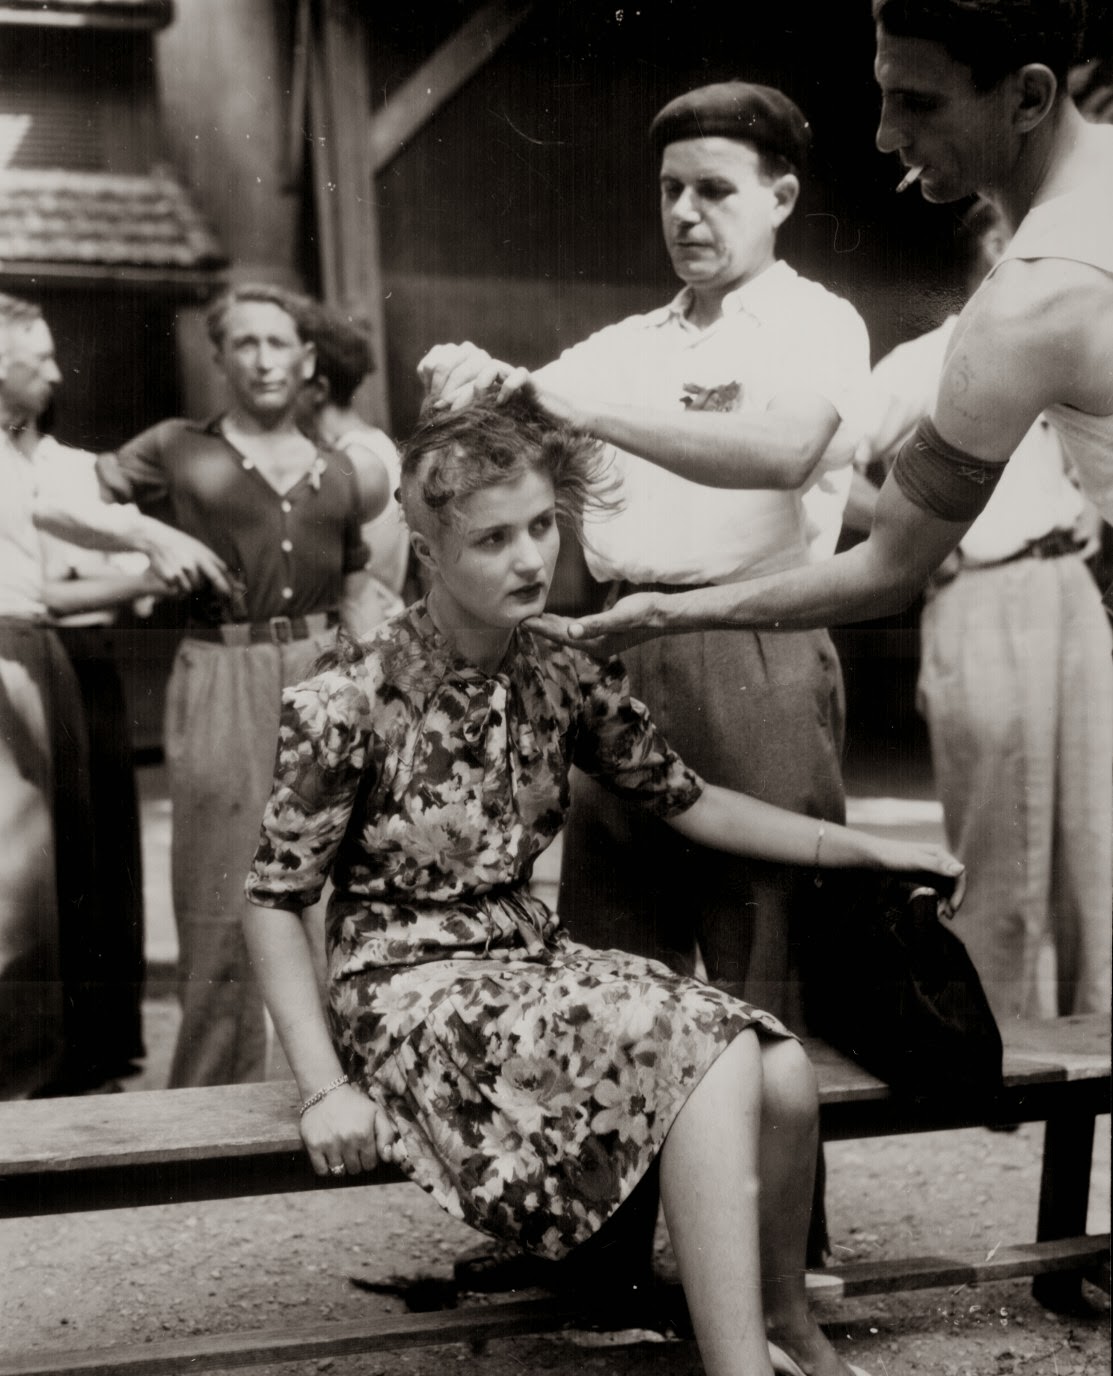 A French woman has her hair cut off in Paris, France in 1944. Once towns all across Europe were freed from Nazi occupation, many women who had any kind of relationship with Germans were humiliated, and in some cases killed. Most men who collaborated were shot. This woman, and many others, would have most likely have a Swastika drawn on her head, stripped down to undergarments, and paraded through a main street for everyone to see and know she had relations with the Germans. The women however got punished regardless of the circumstances.